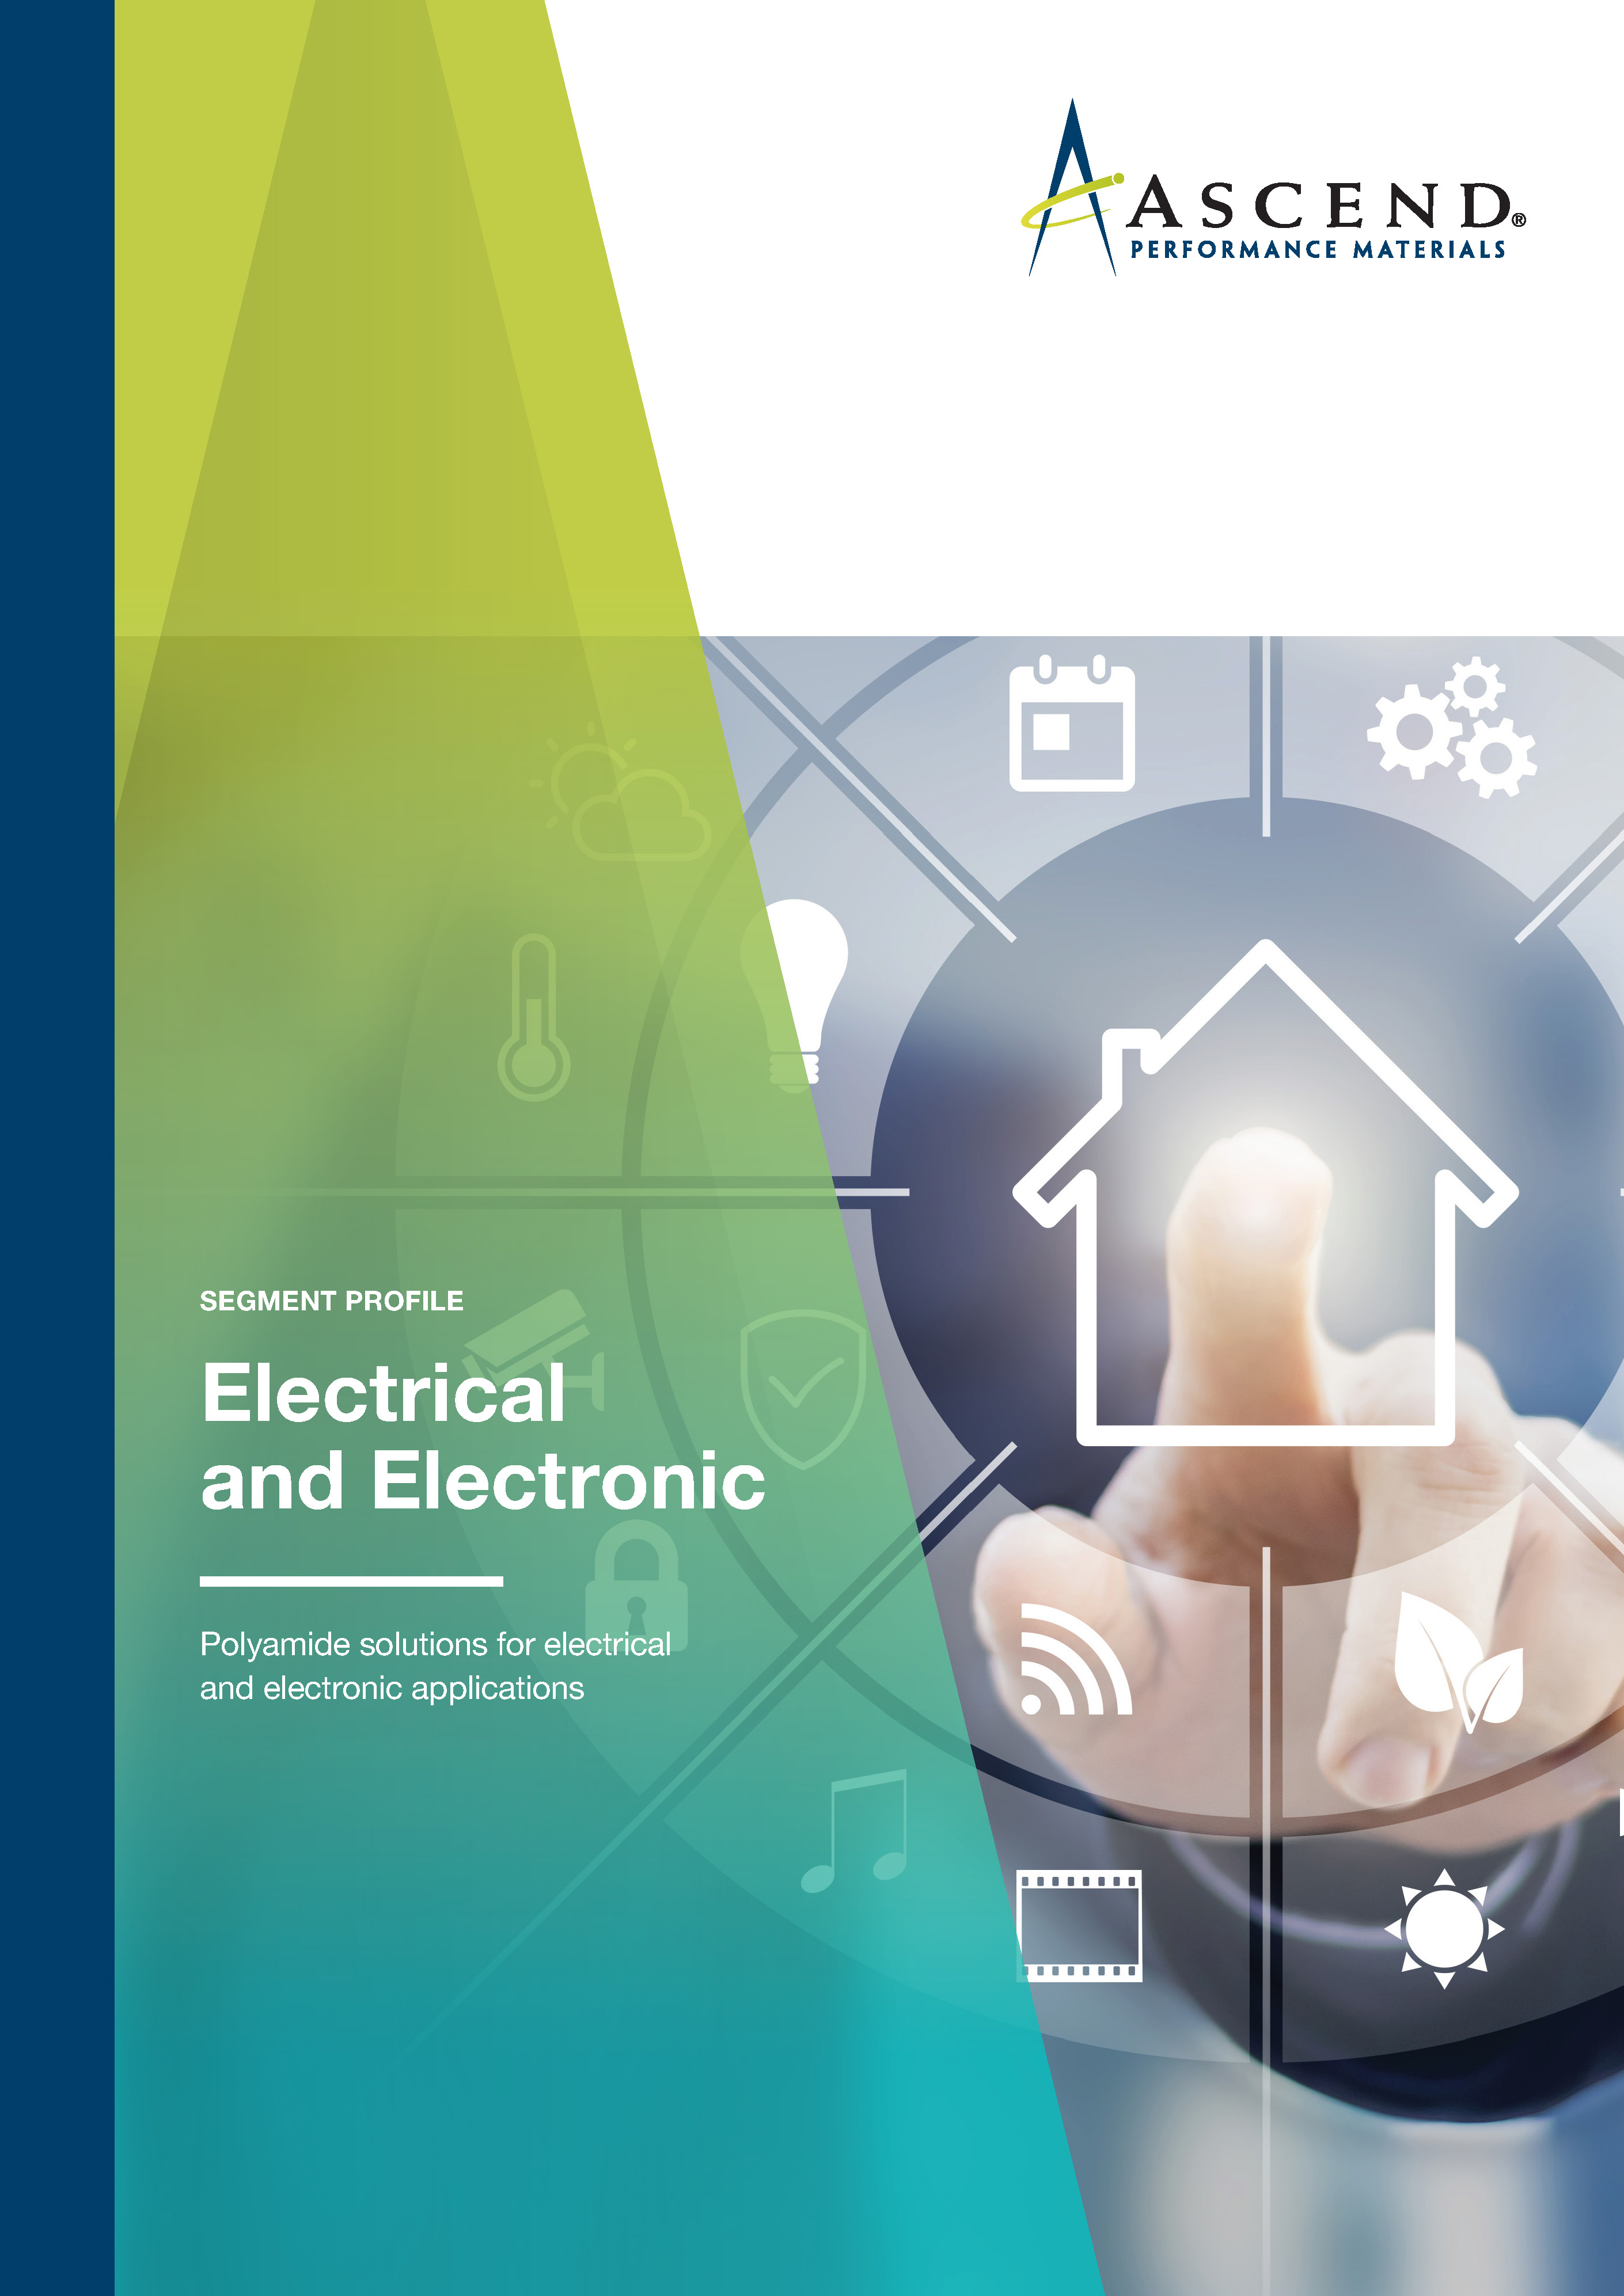 Products for electrical and electronic applications